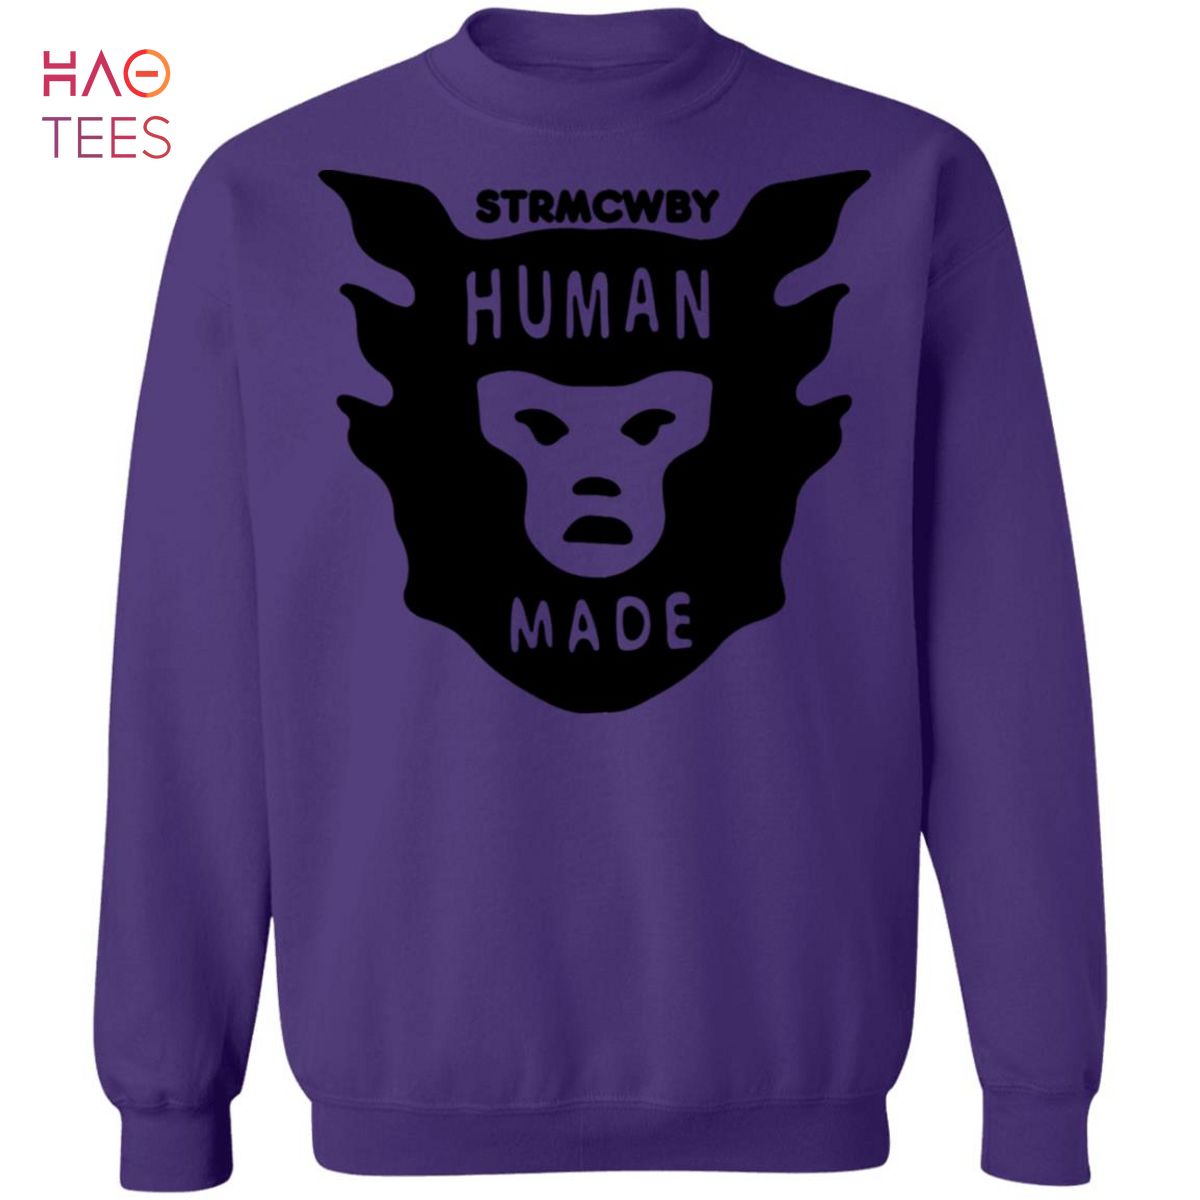 HUMAN MADE / STRMCWBY Pullover Hoodieトップス - パーカー